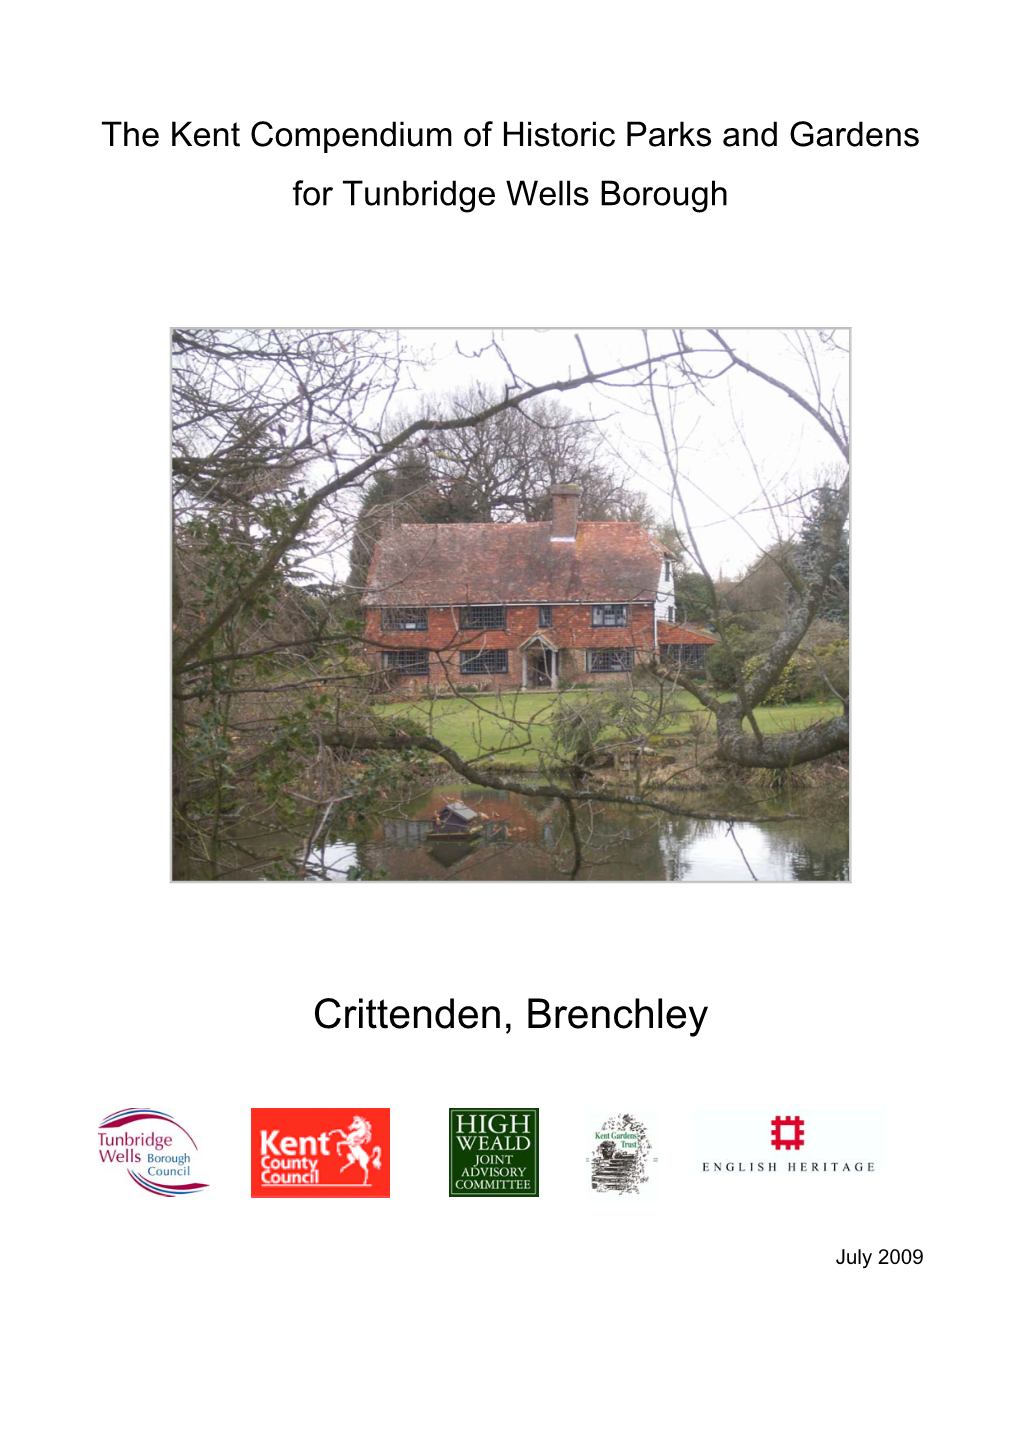 Crittenden, Brenchley